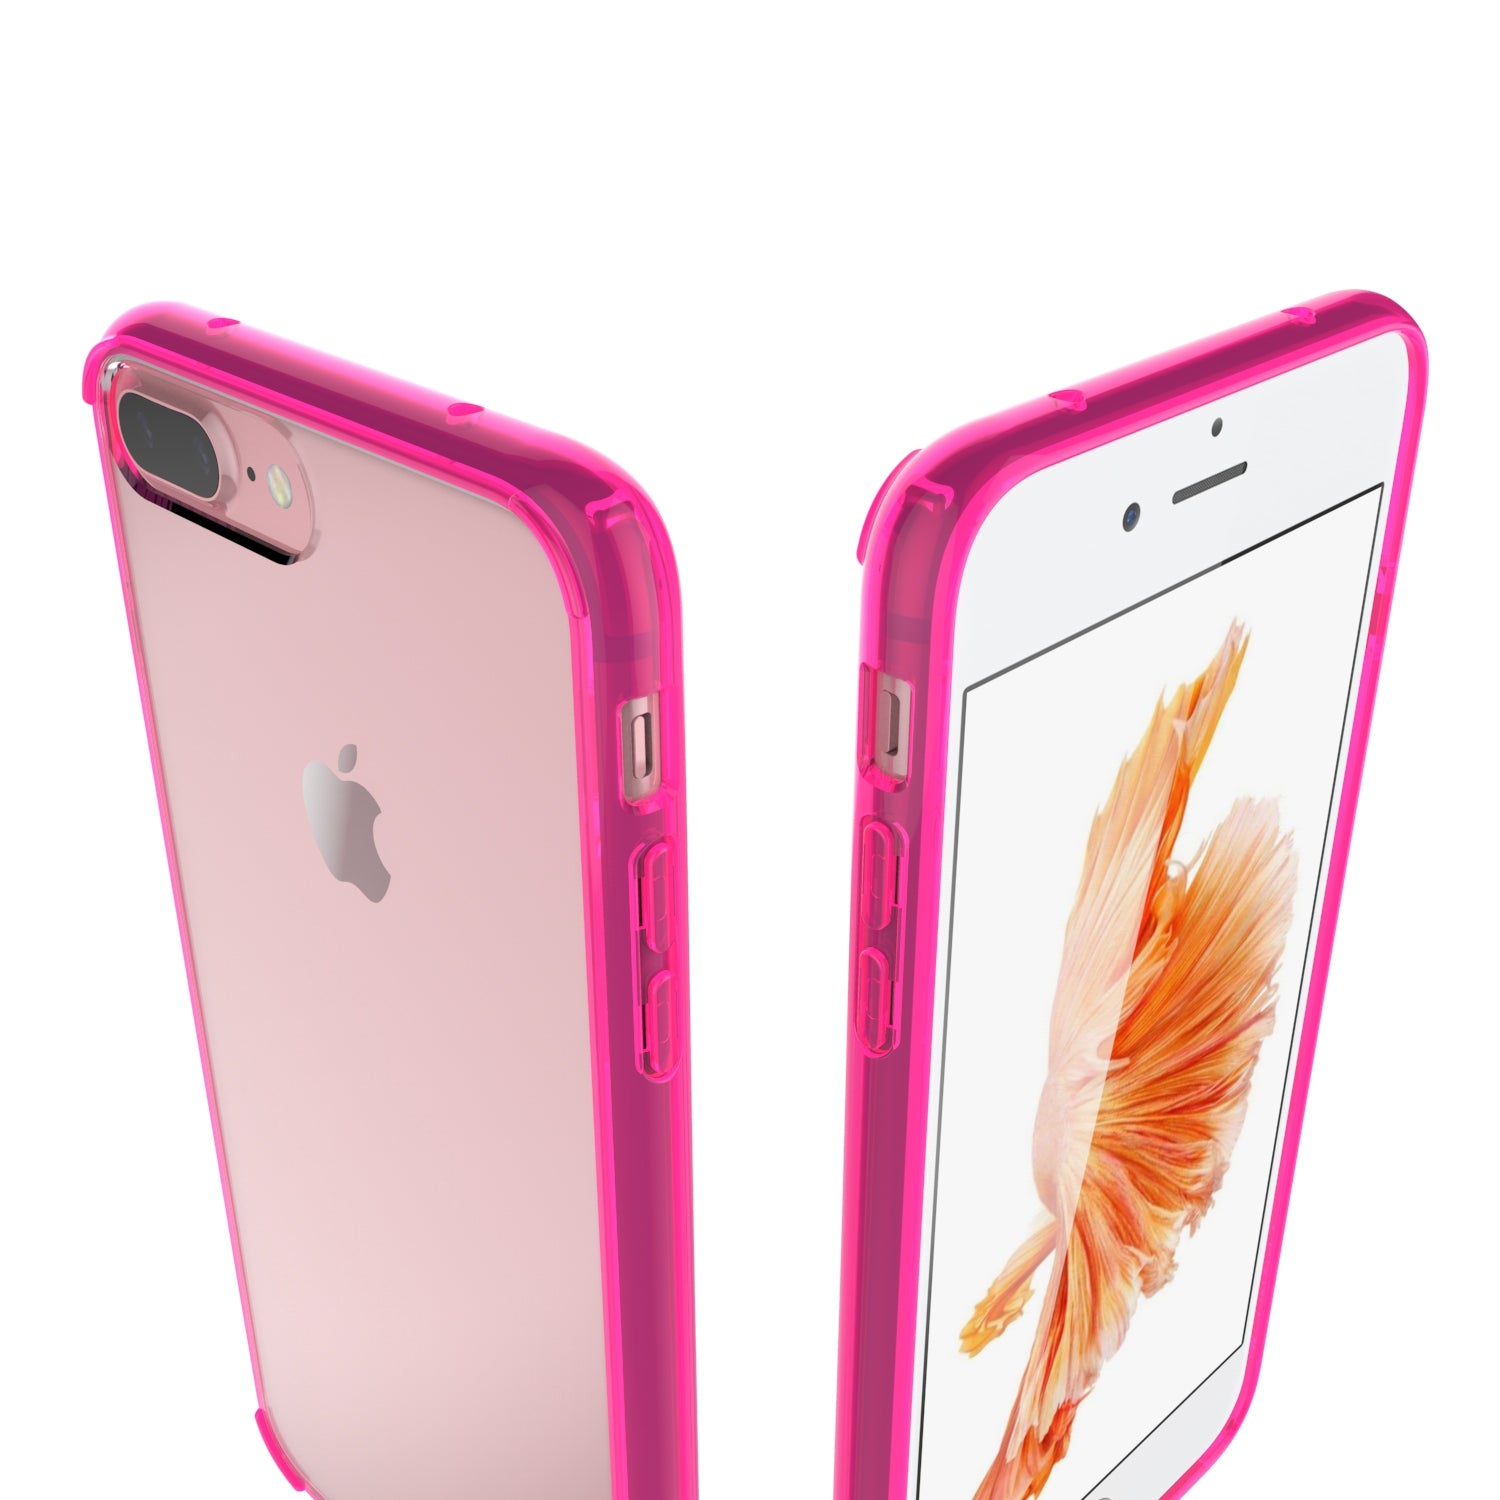 Luvvitt Clear View Hybrid Case for iPhone 7 Plus and 8 Plus - Transparent Pink